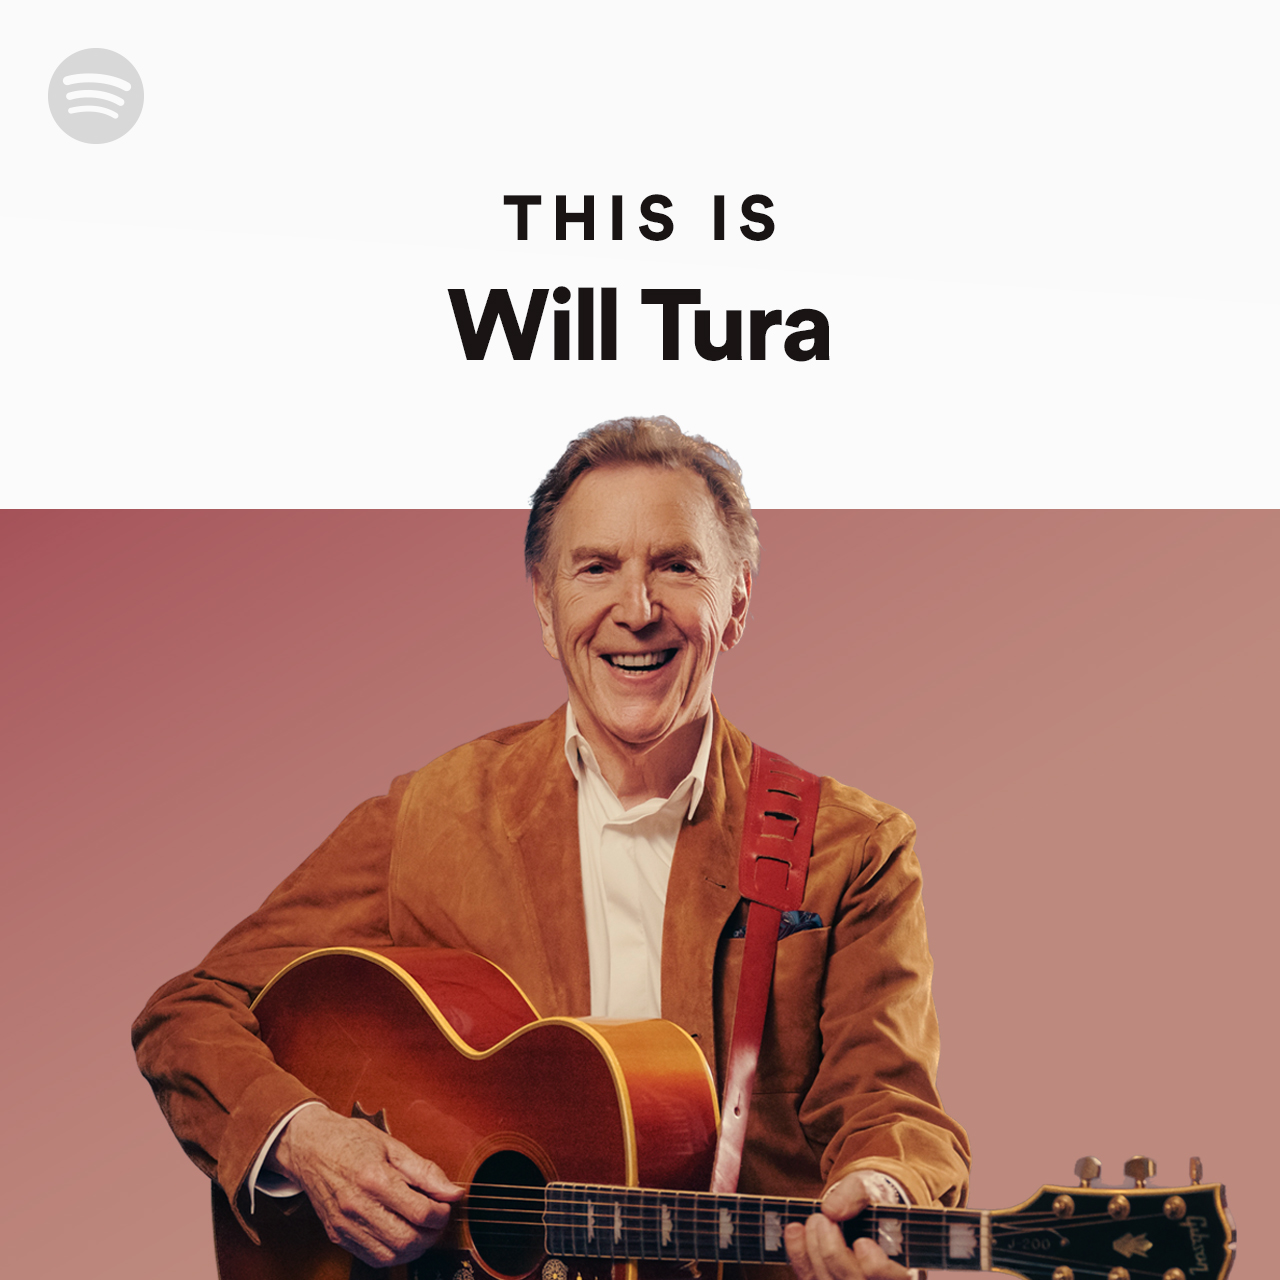 This Is Will Tura